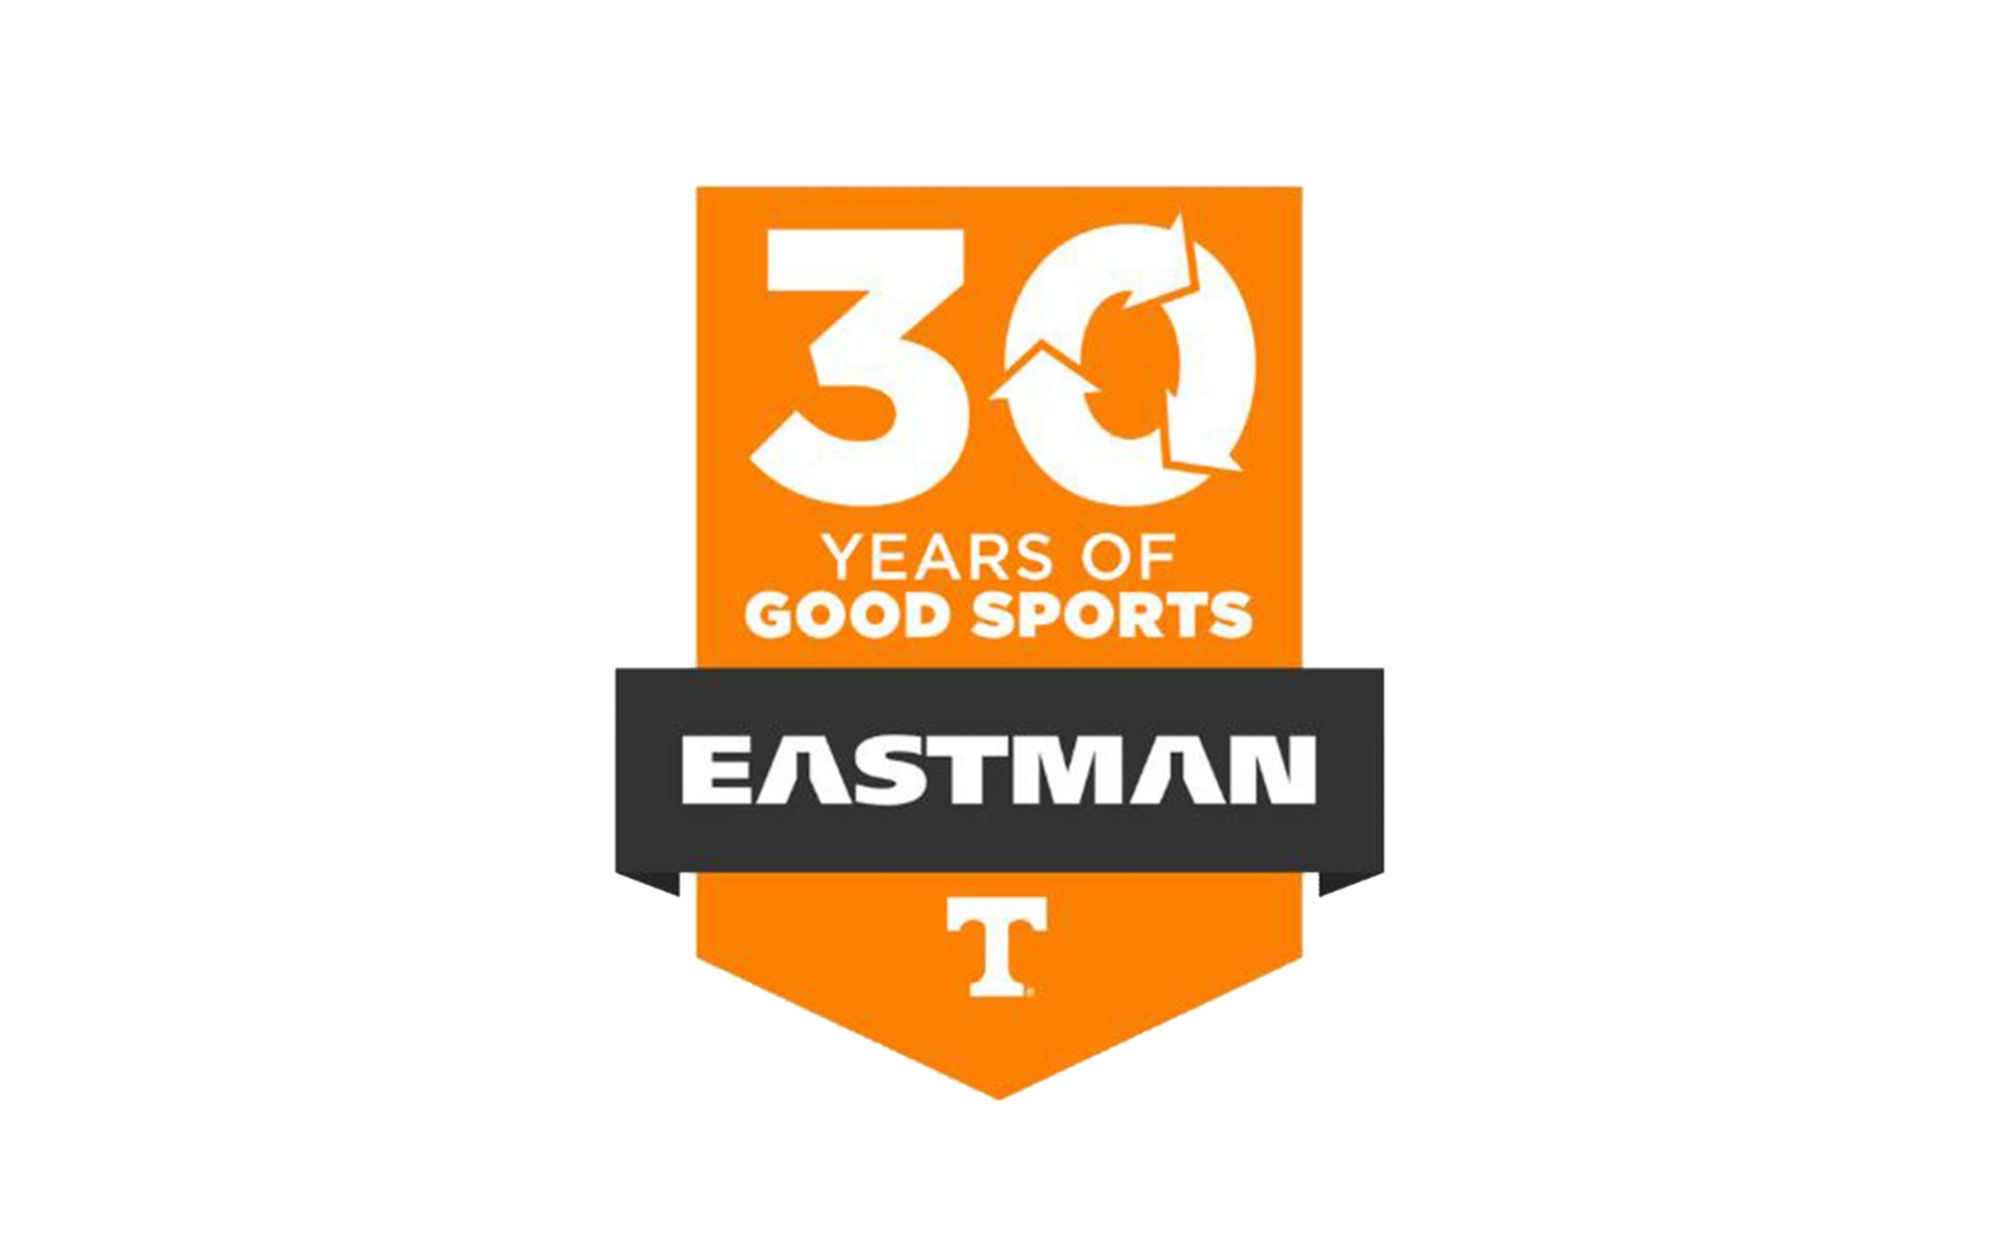 An orange logo for UT and Eastman's 30 Years of Good Sports recycling. 